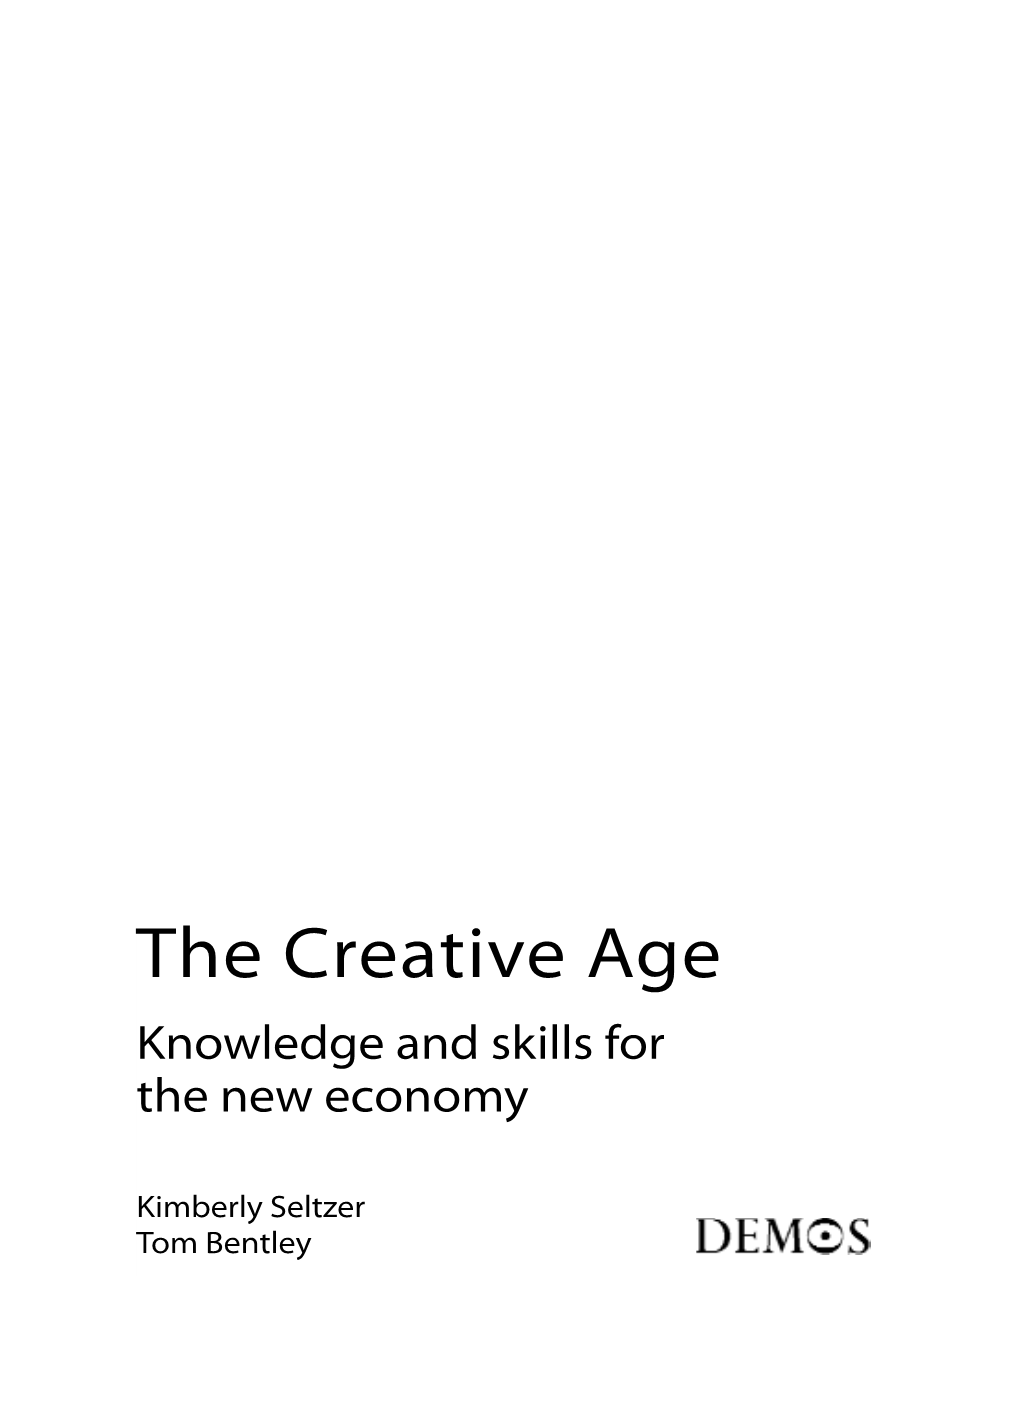 The Creative Age: Knowledge and Skills for the New Economy